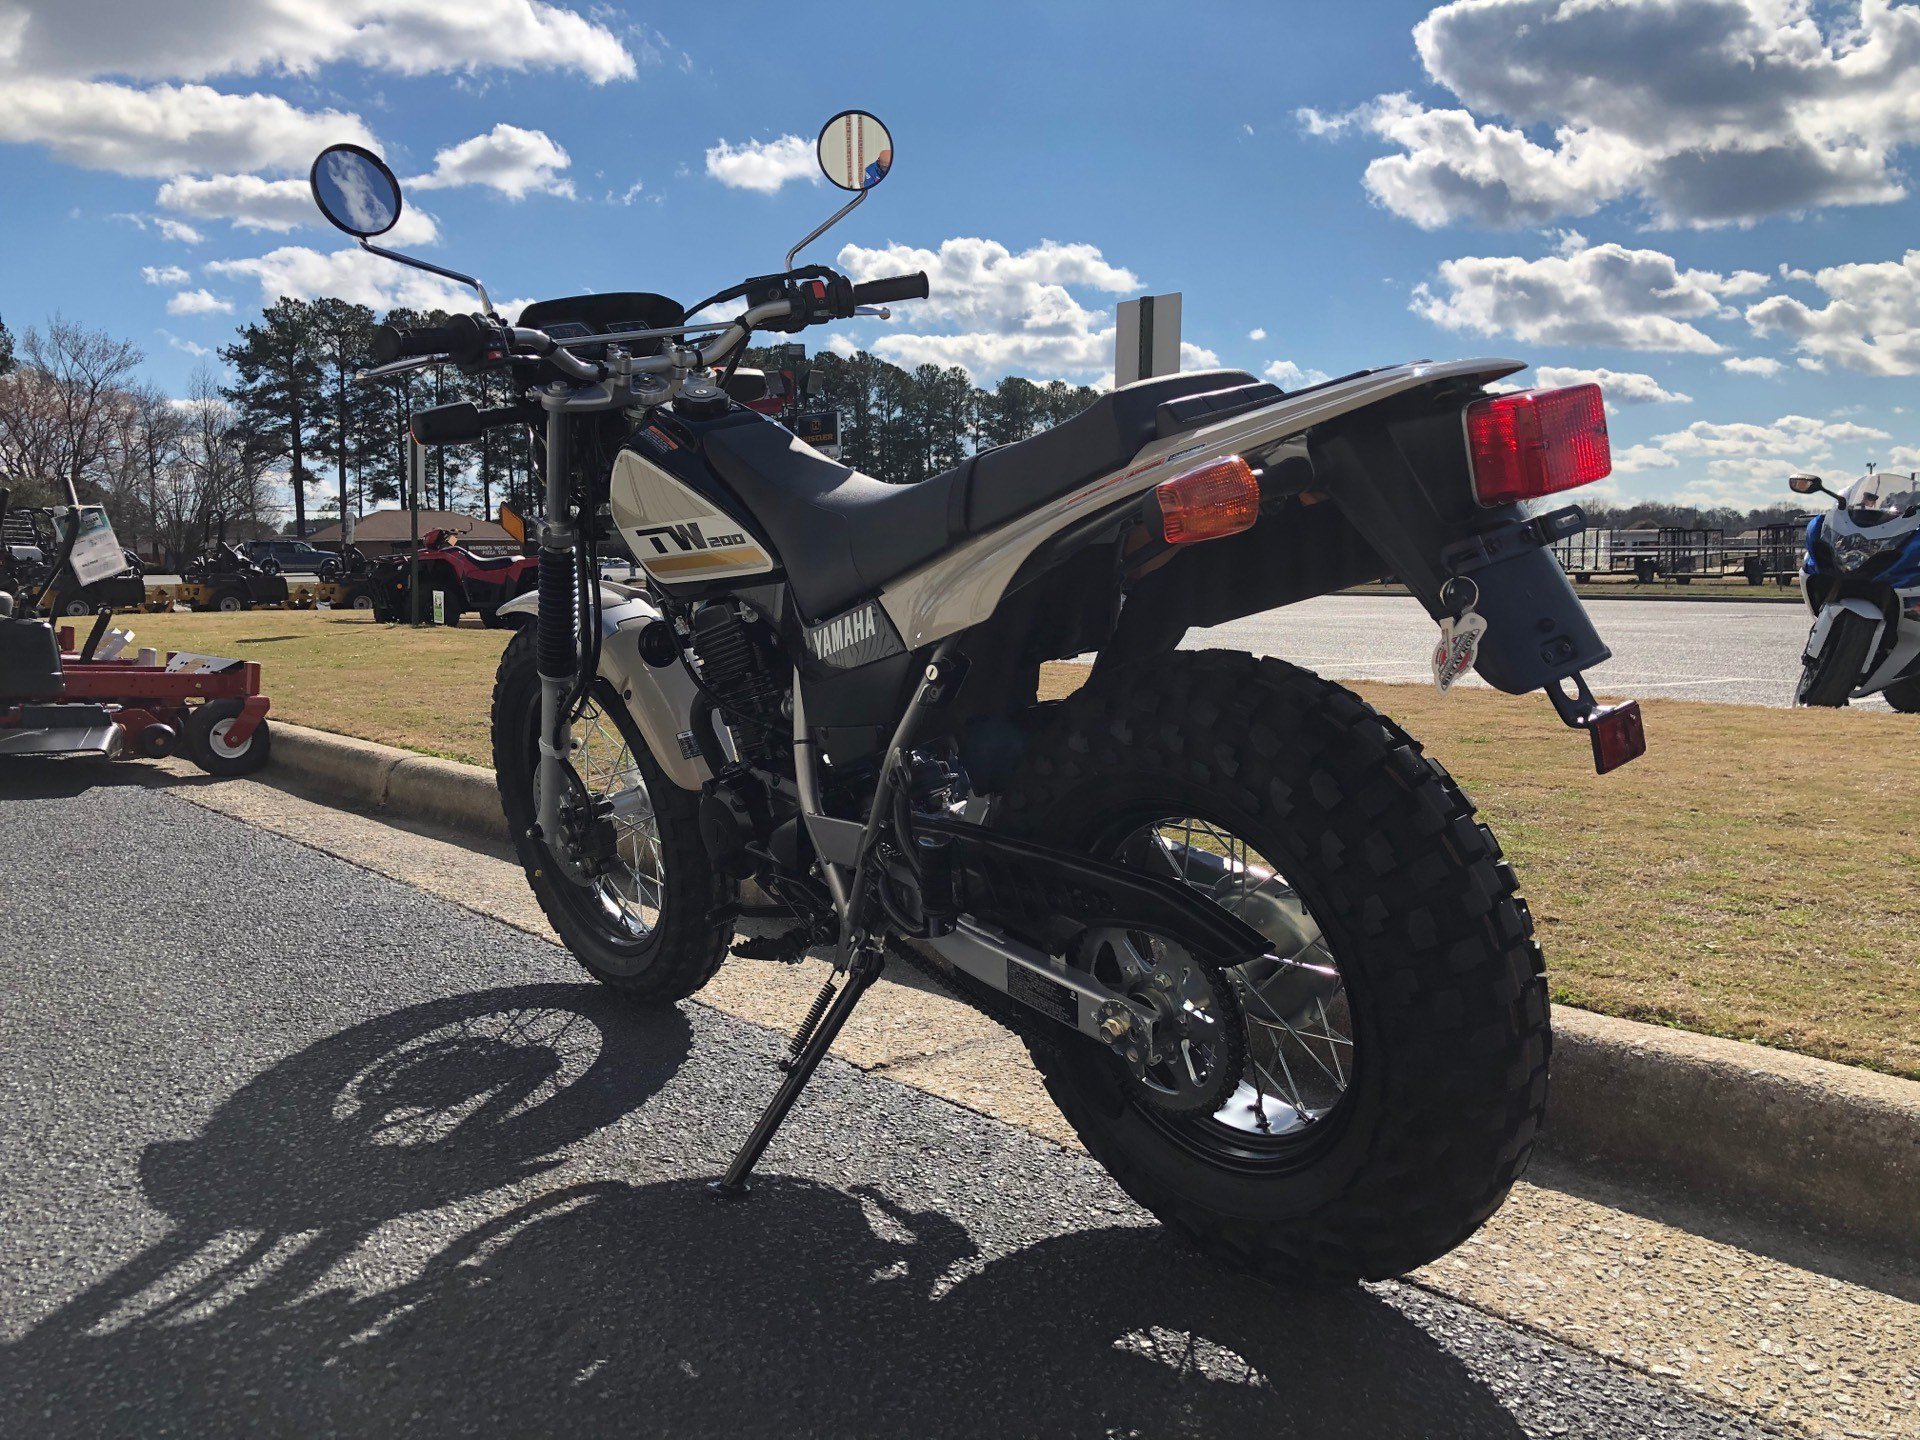 New 2020 Yamaha TW200 Motorcycles in Greenville, NC ...